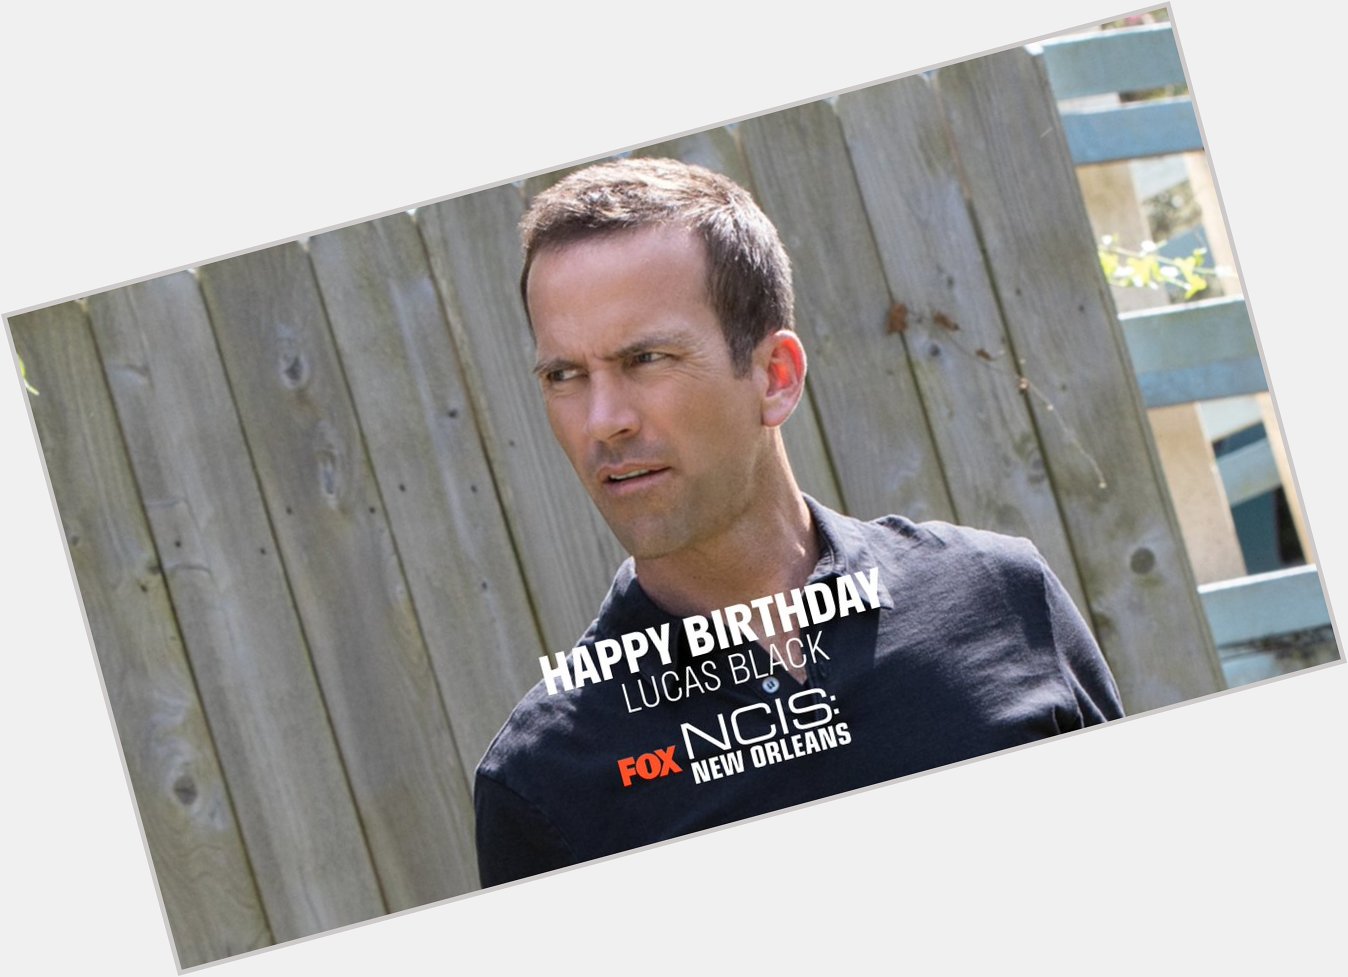 We\re still not over Christopher LaSalle... But Happy Birthday to Lucas Black! 